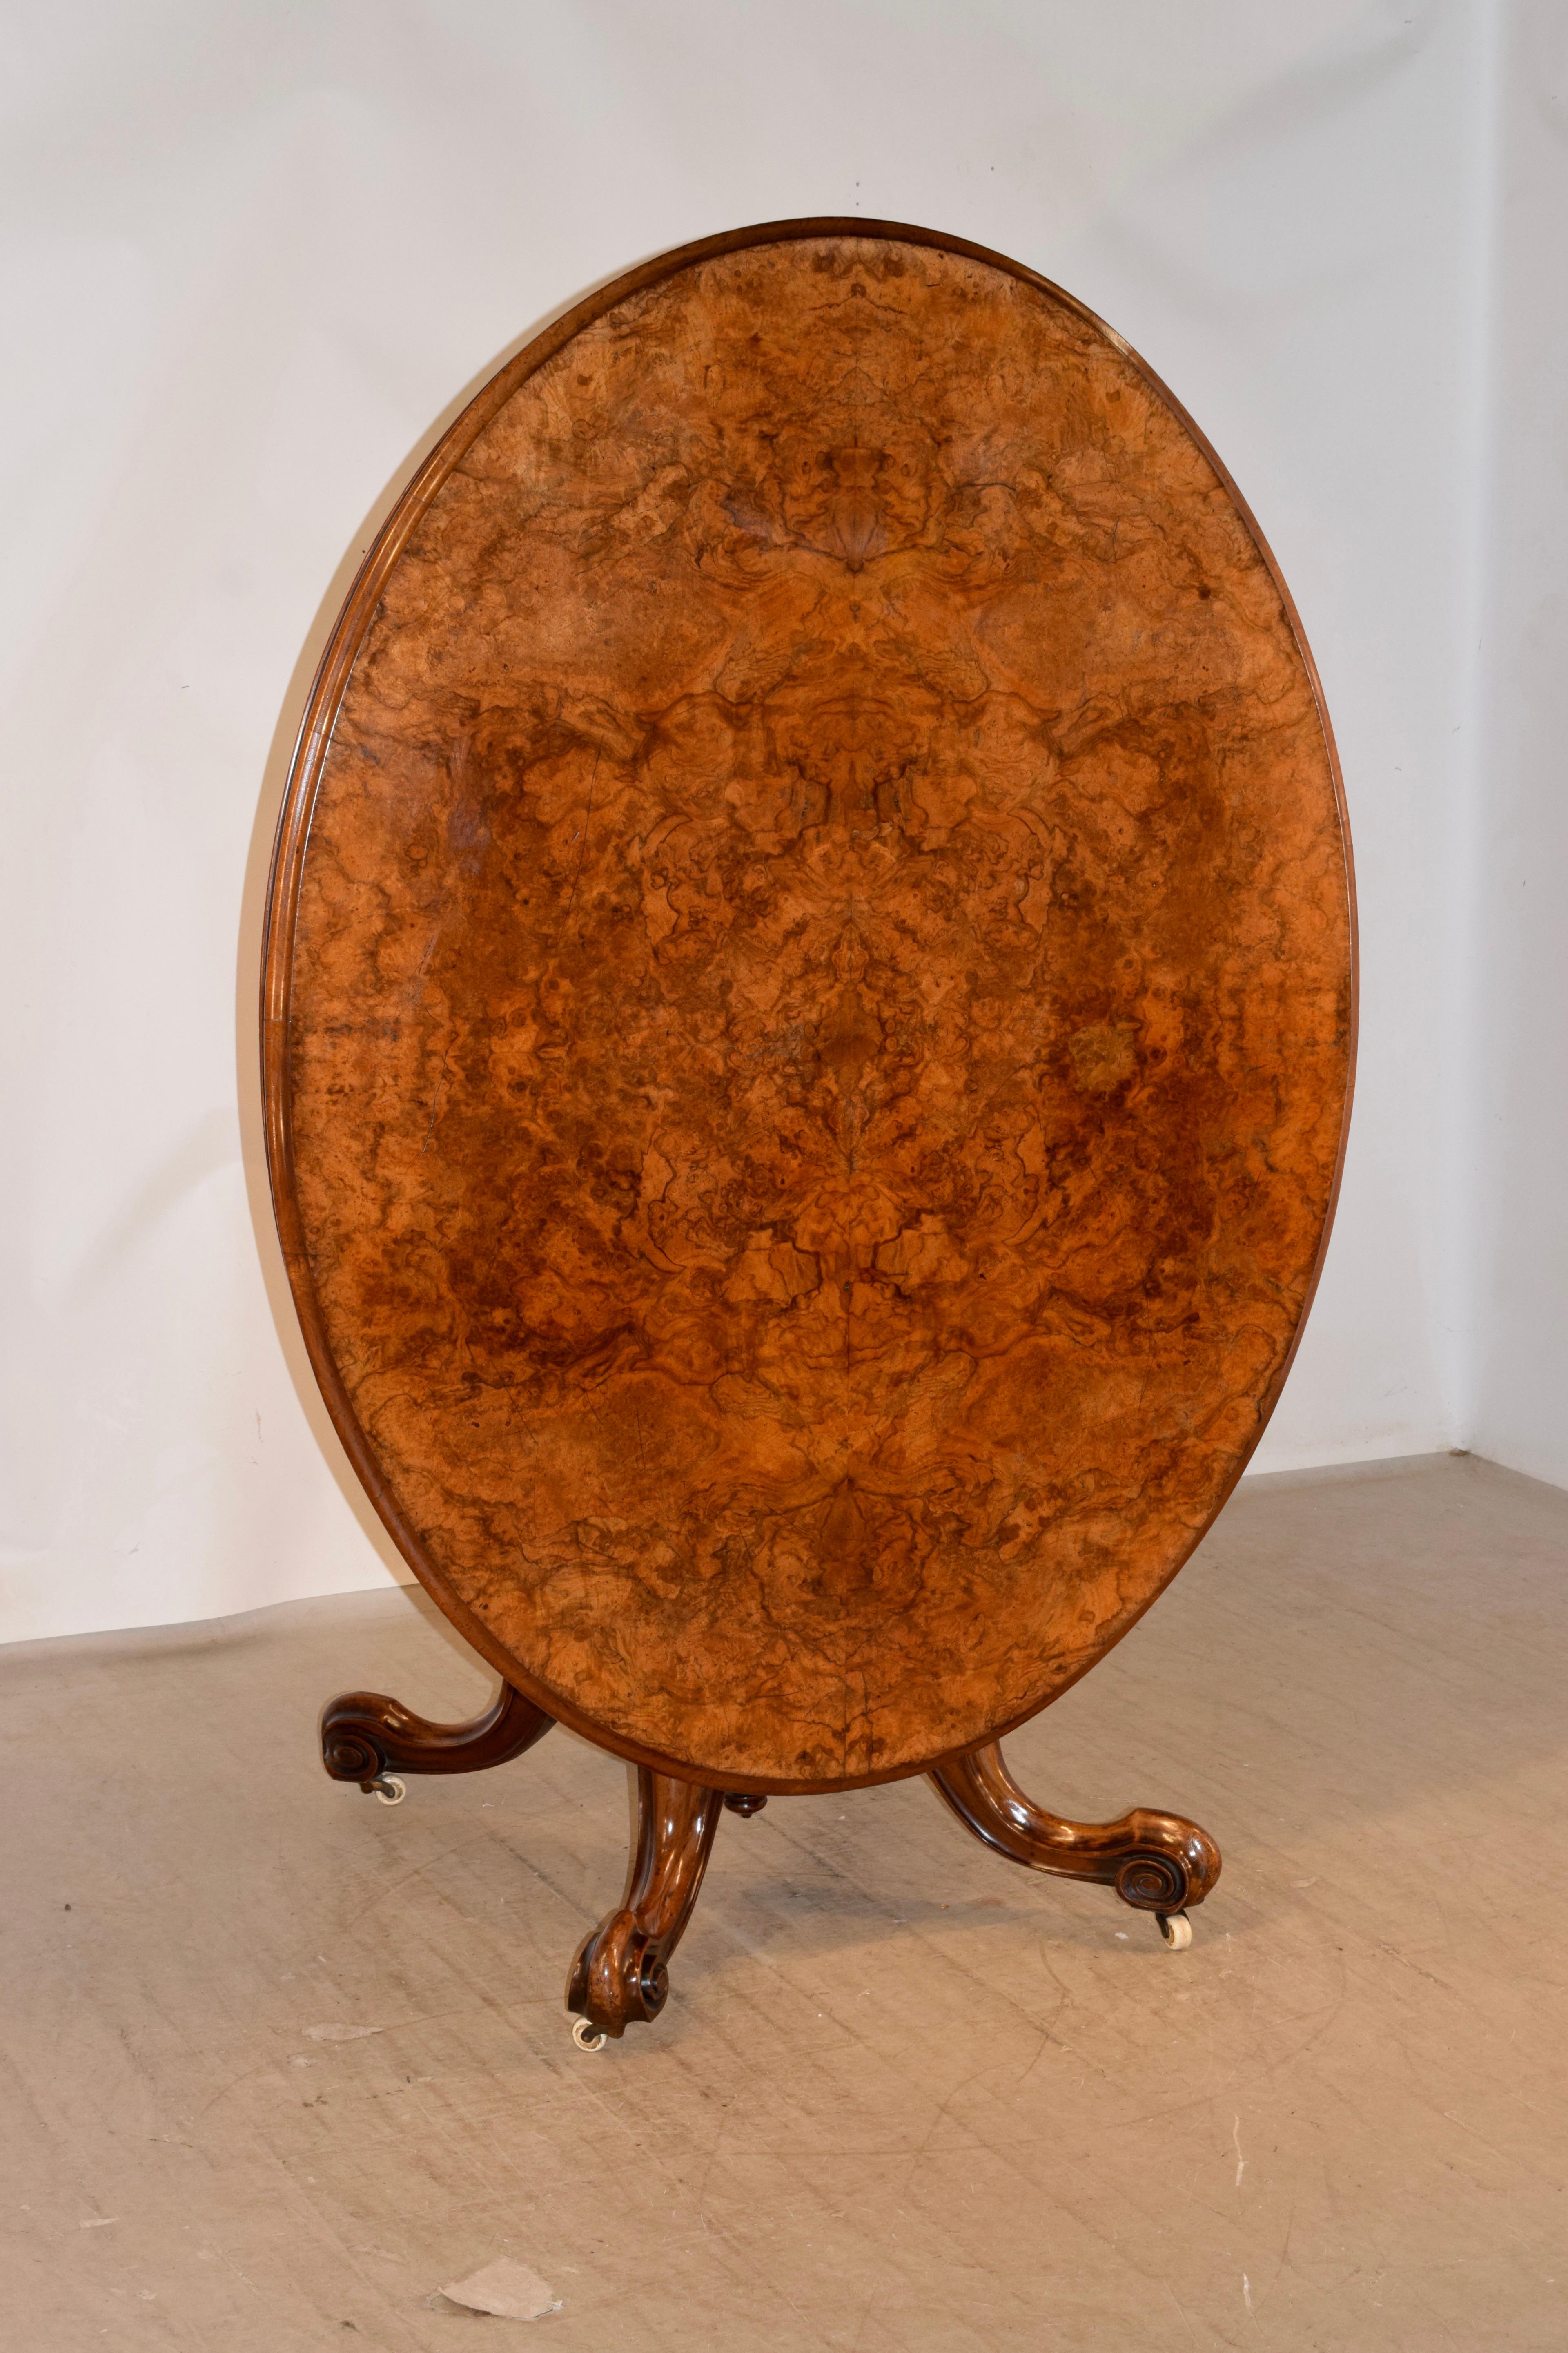 19th century burl walnut tilt-top breakfast table. The top is exquisitely grained and has a beveled edge, over a burl apron. The table is supported on a fluted decorated column which has wonderful raised carvings as well. The base is supported on